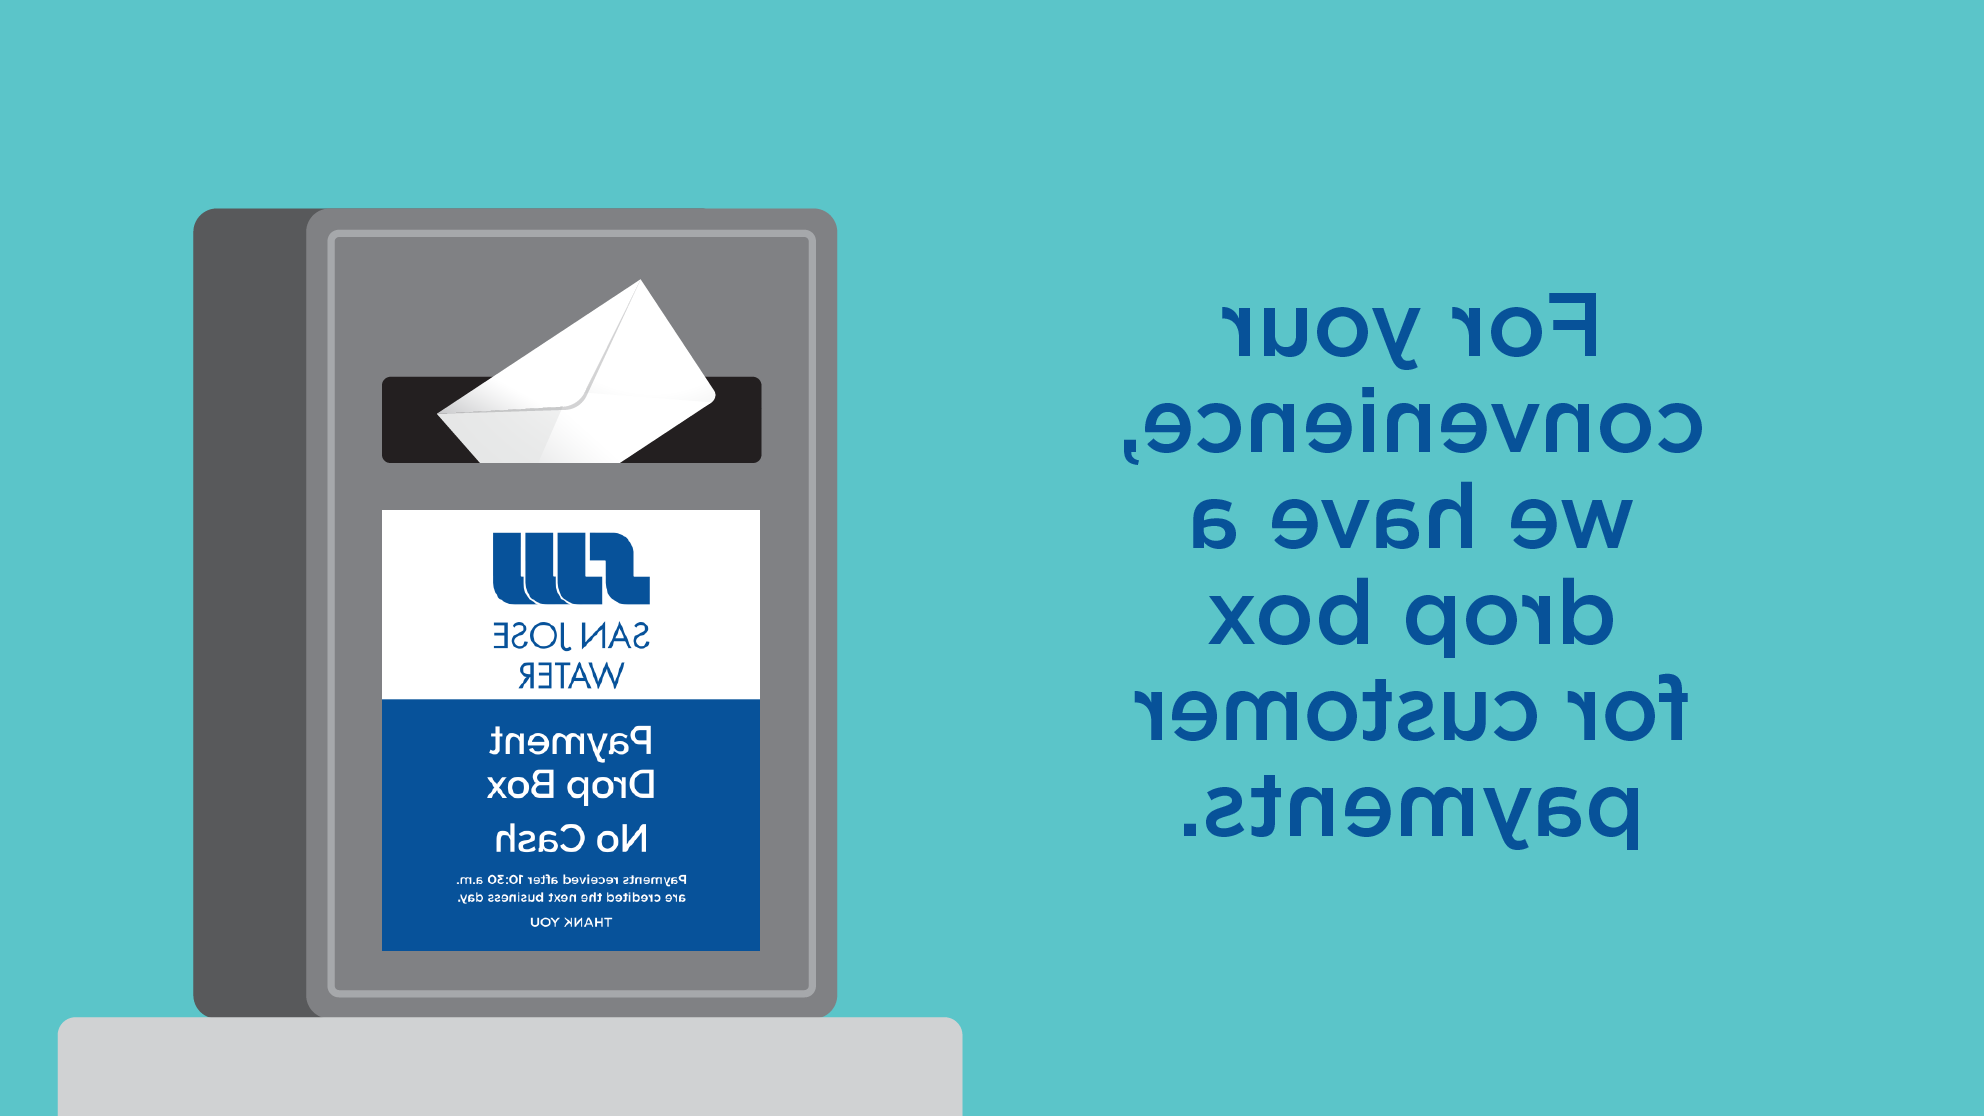 Graphic of drop box with text "for your convenience, we have a drop box for 客户 payments."